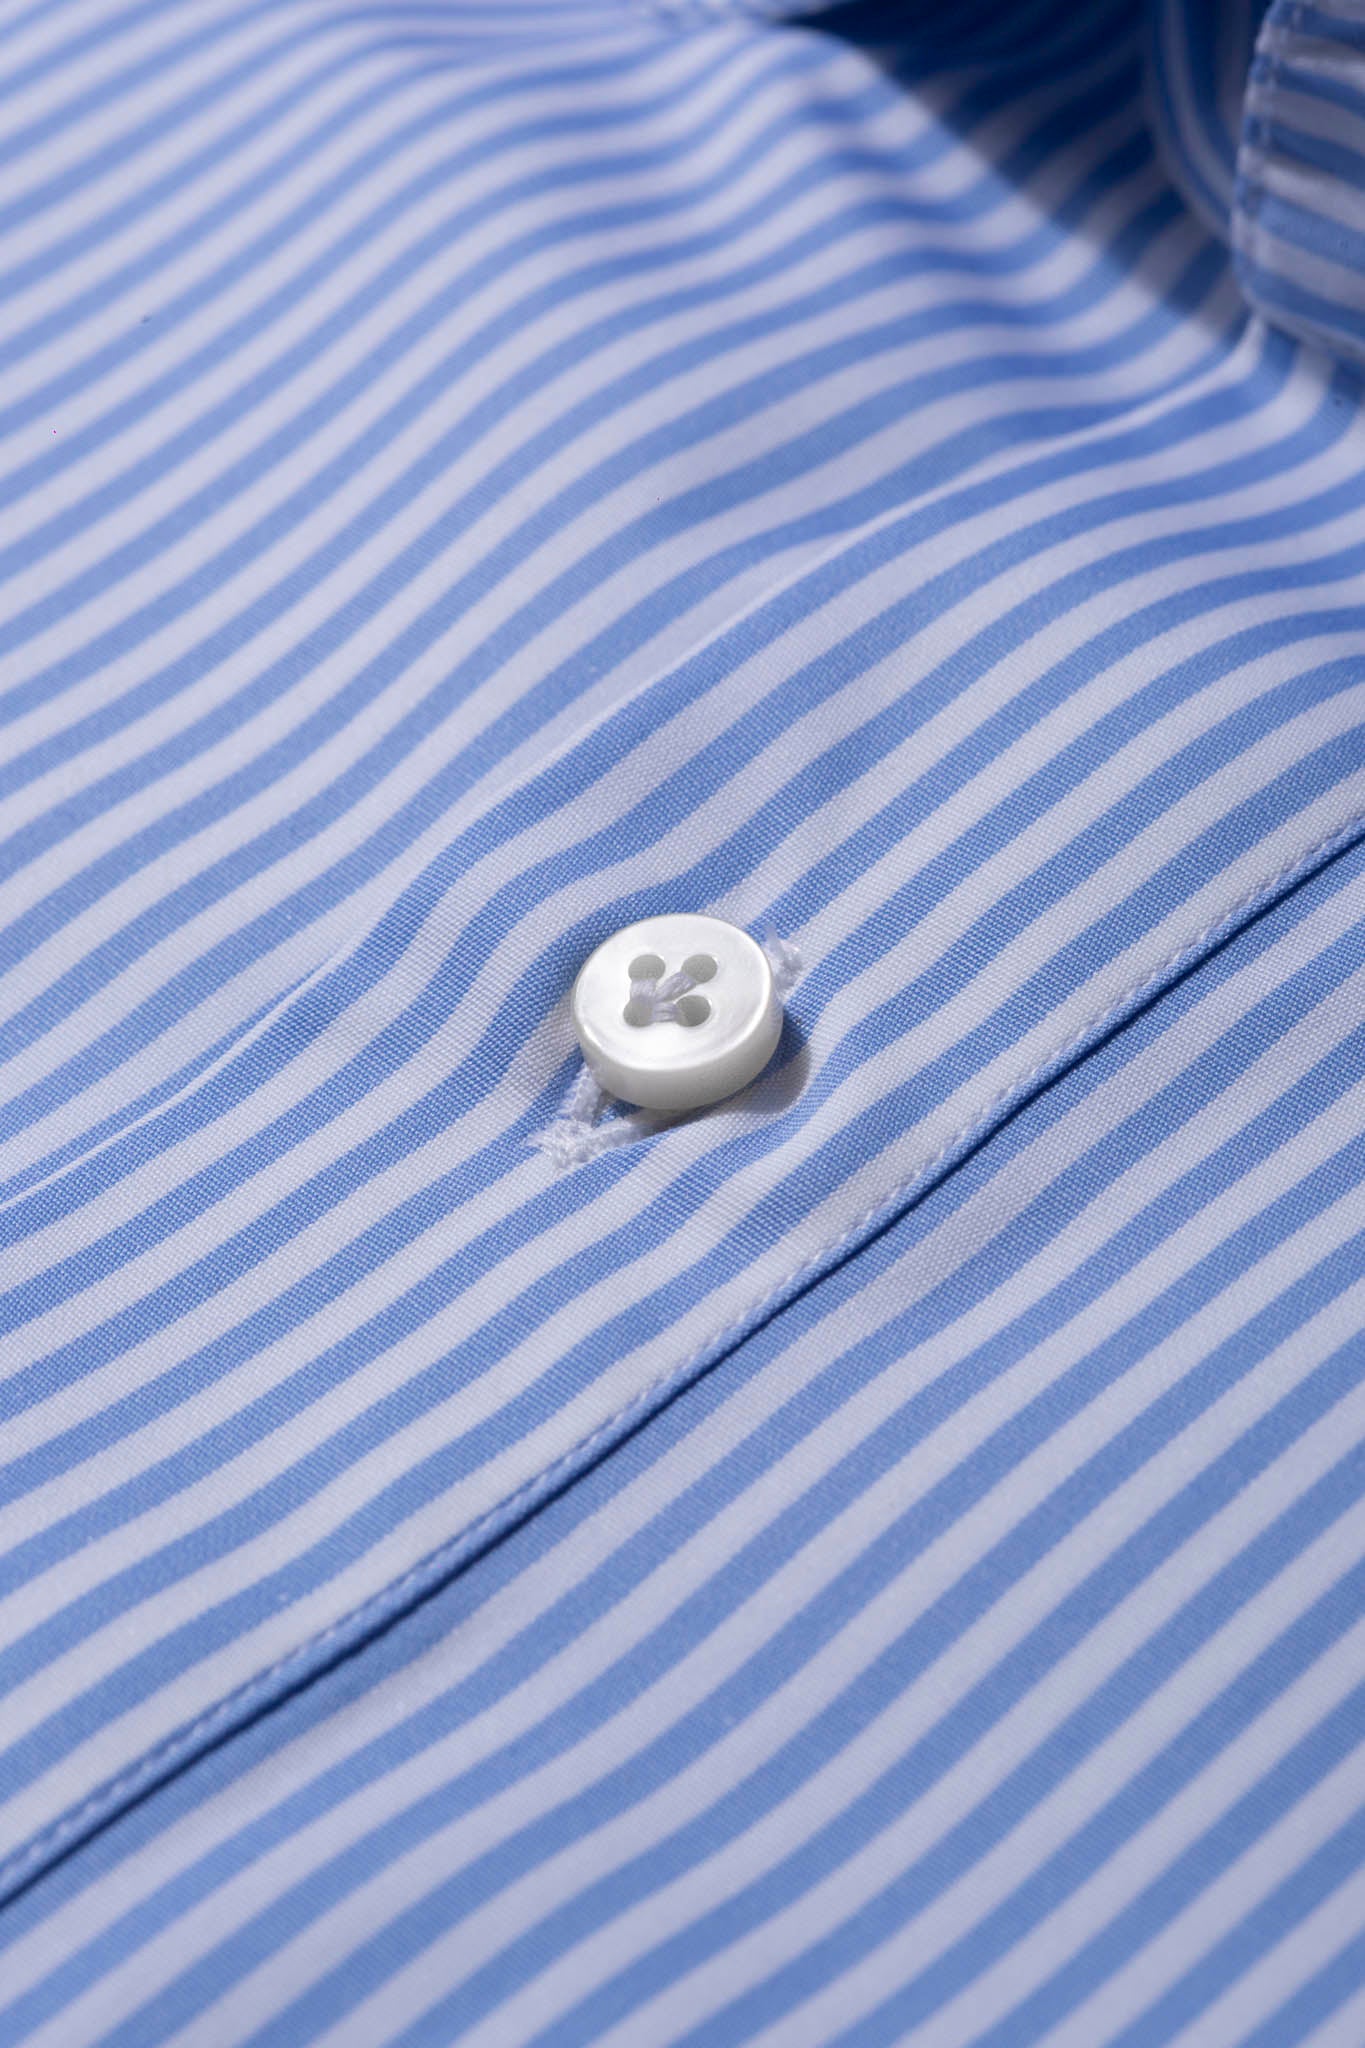 Light blue striped popover shirt - Made in Italy